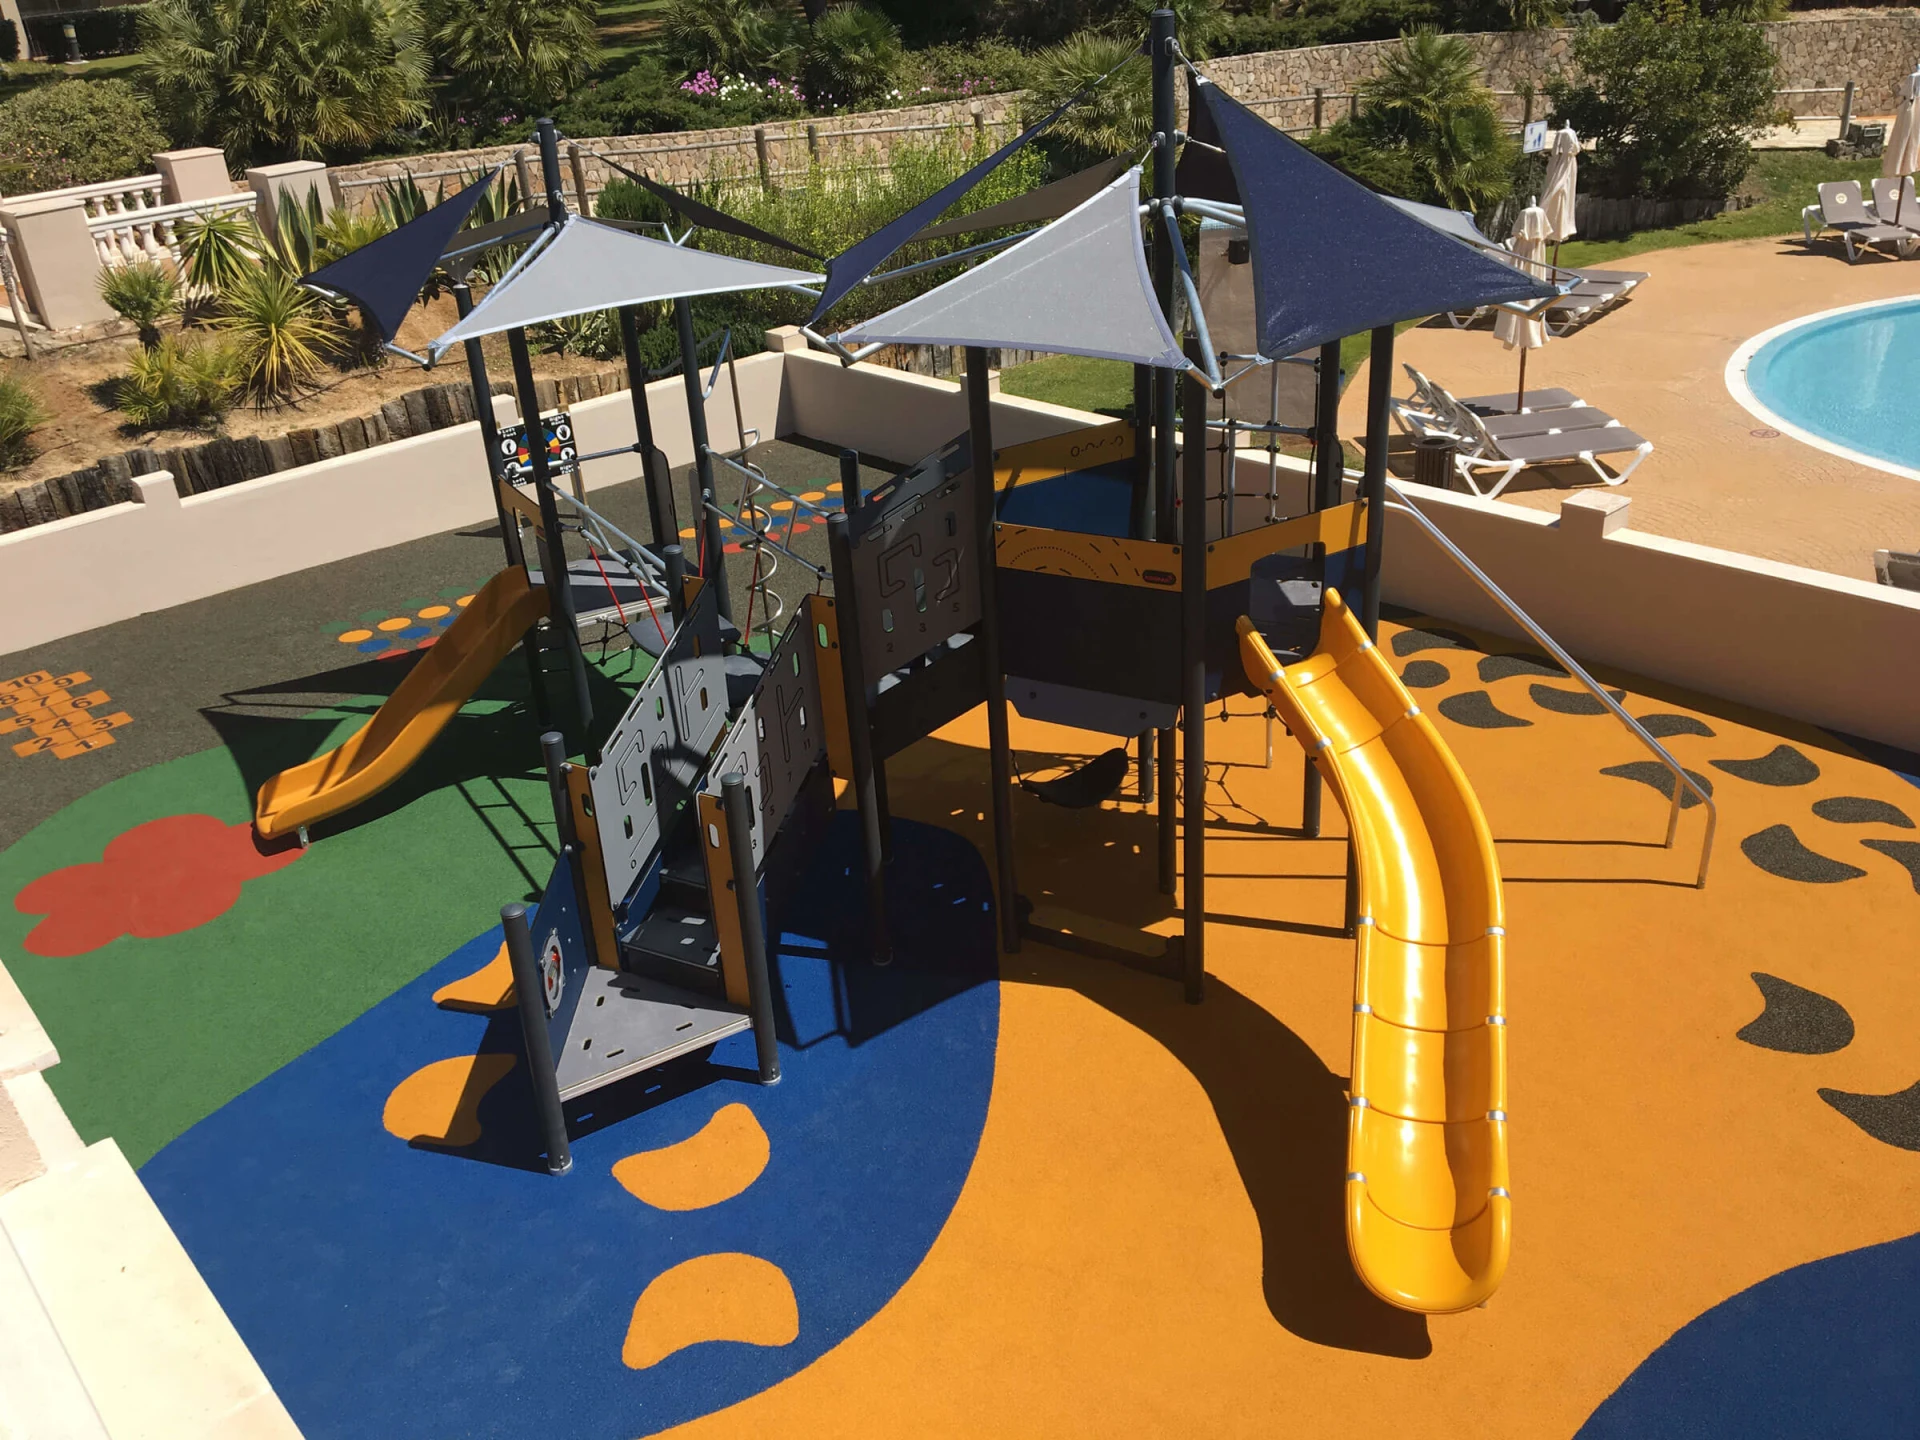 playground structure with build-in sunshades